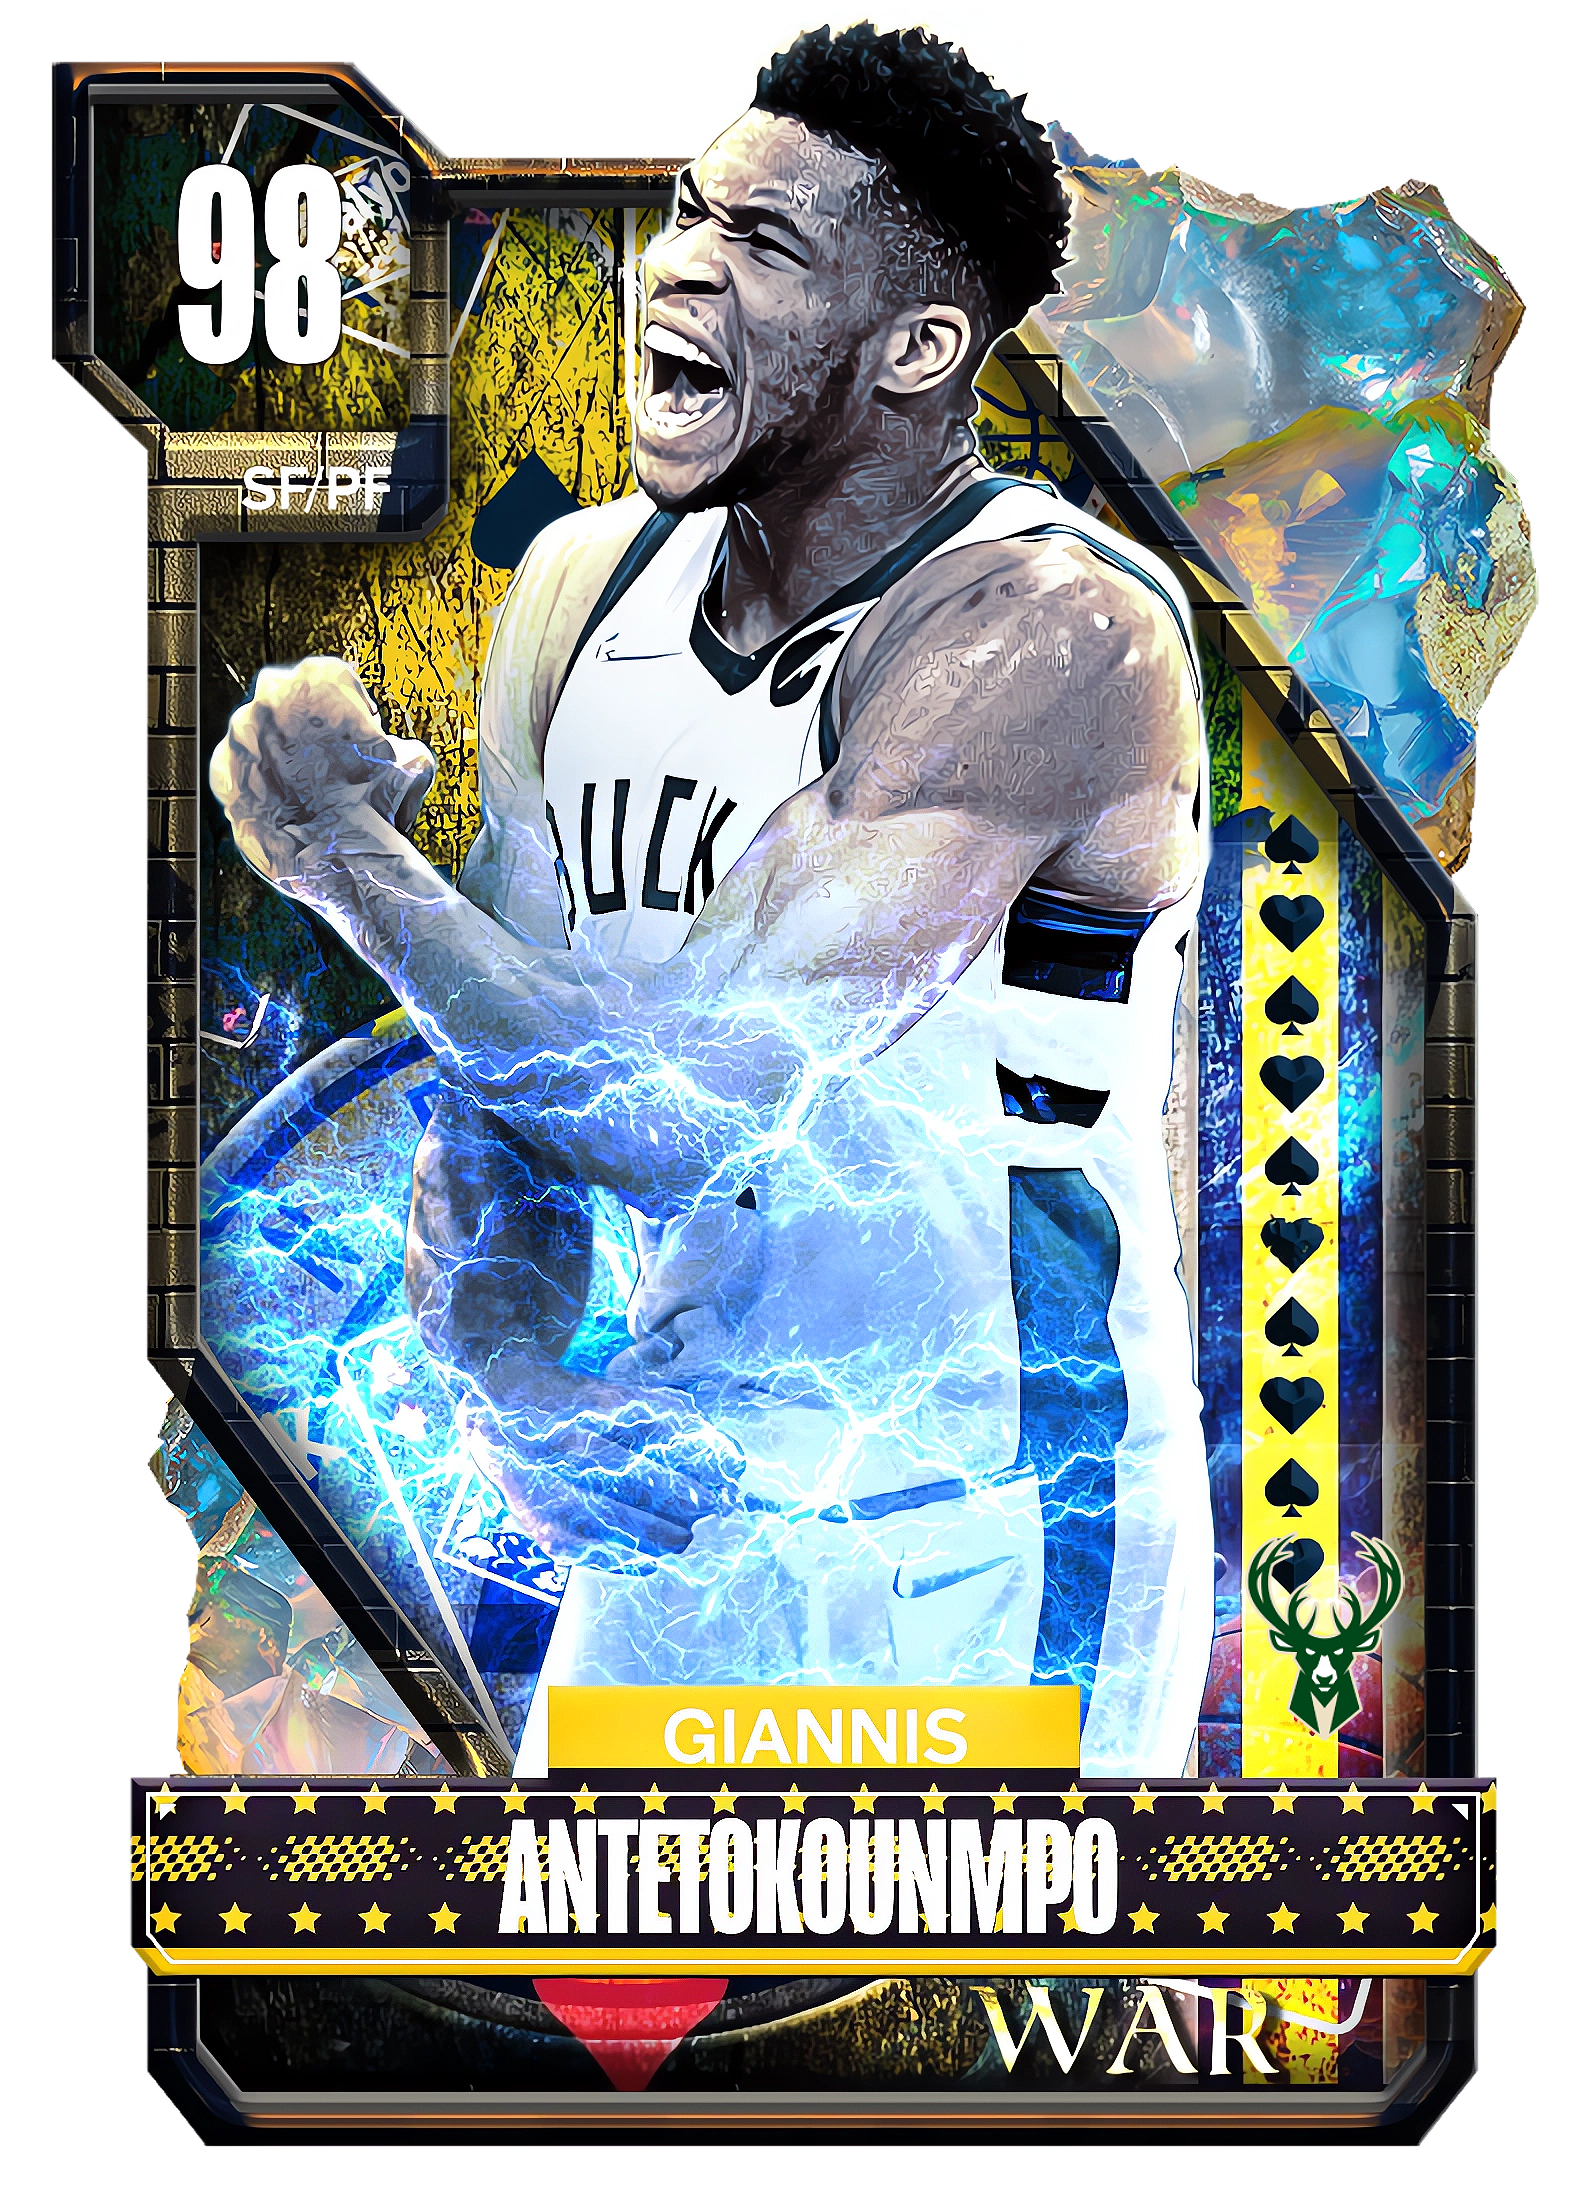 Giannis Antetokounmpo this temp includes the game ball and actual playing cards from the card game war and some playing card logos